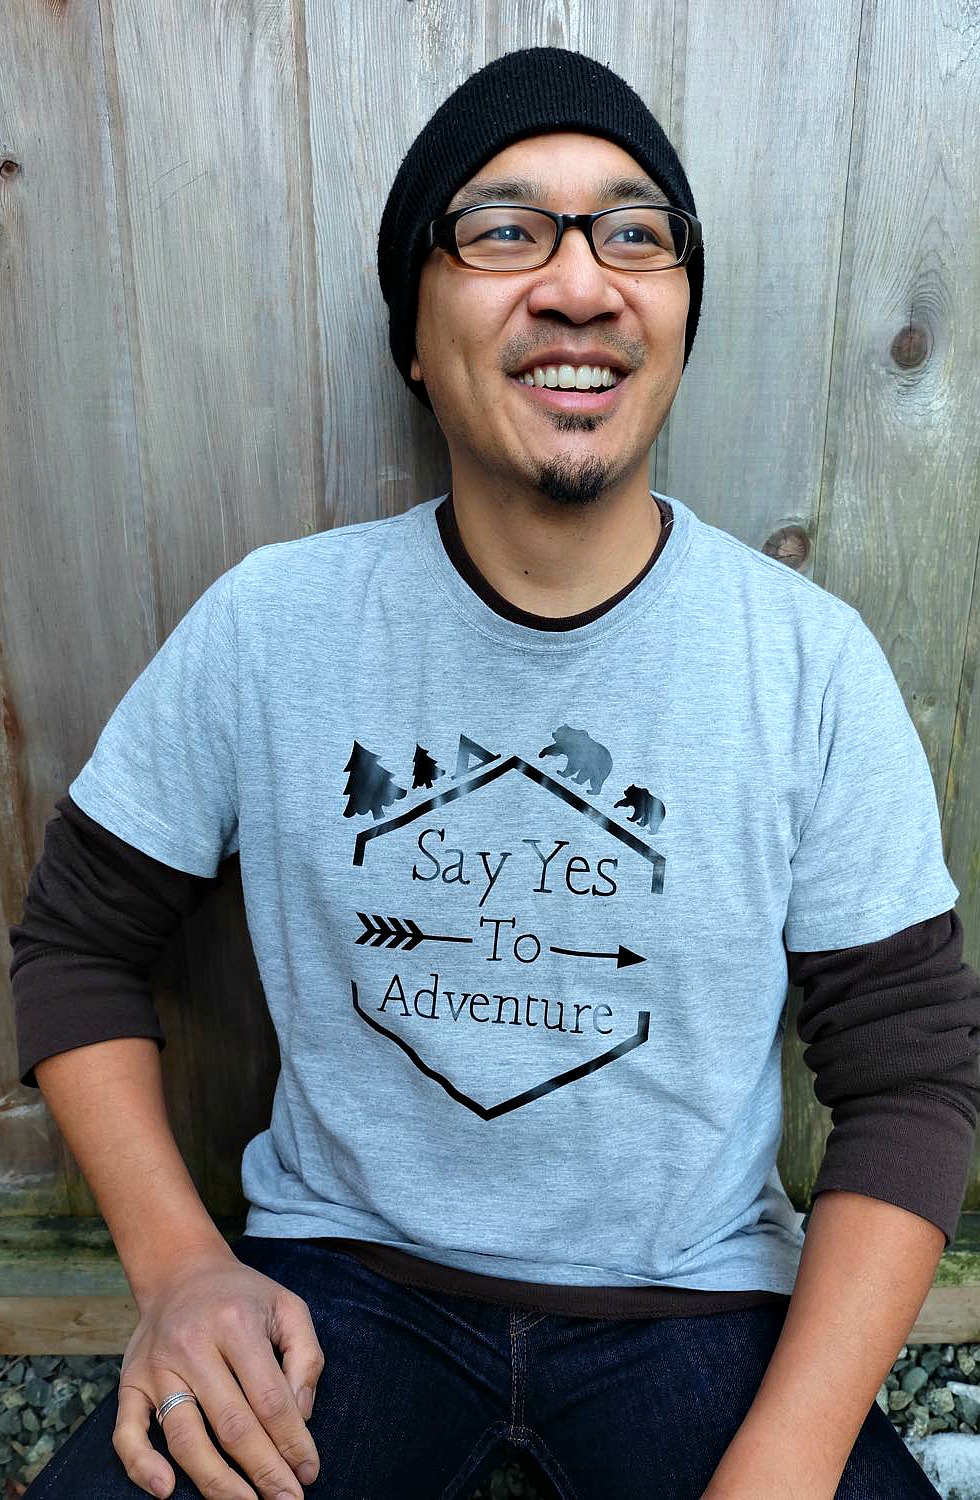 No matter what adventure life throws your way, say yes to adventure with this DIY shirt! Made using the Cricut, this post contains a free cut file and makes an adorable shirt for camping, hiking and other outdoor adventures! 